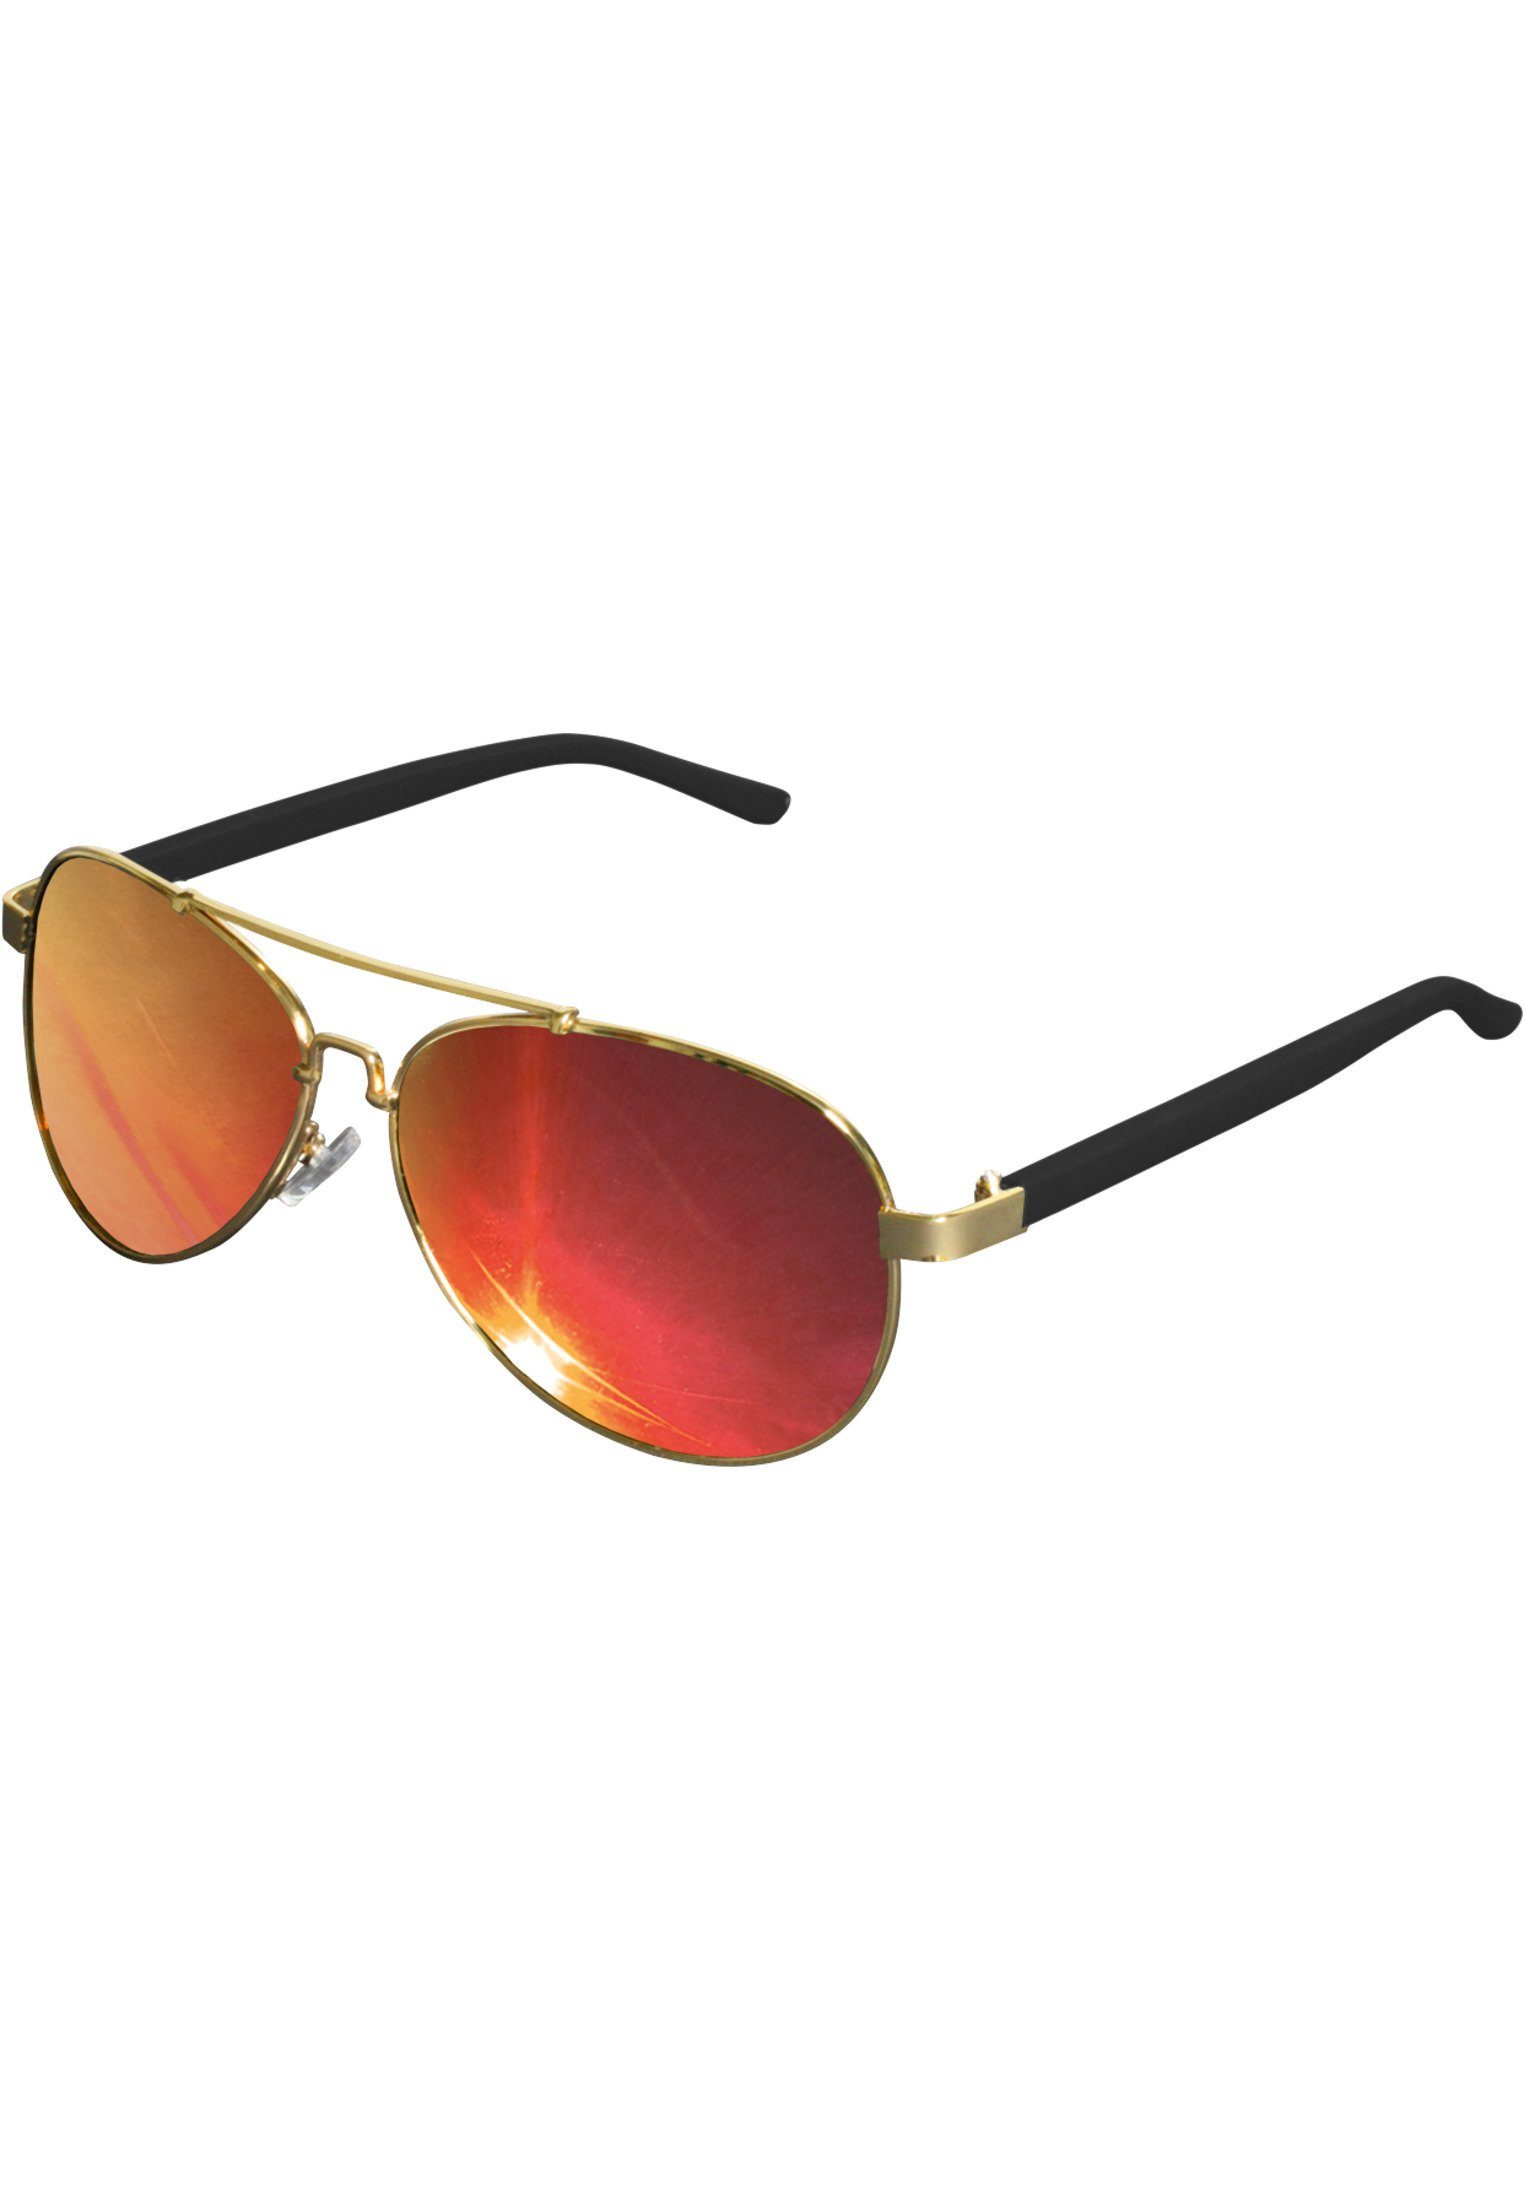 Sunglasses MSTRDS Sonnenbrille Accessoires Mumbo gold/red Mirror